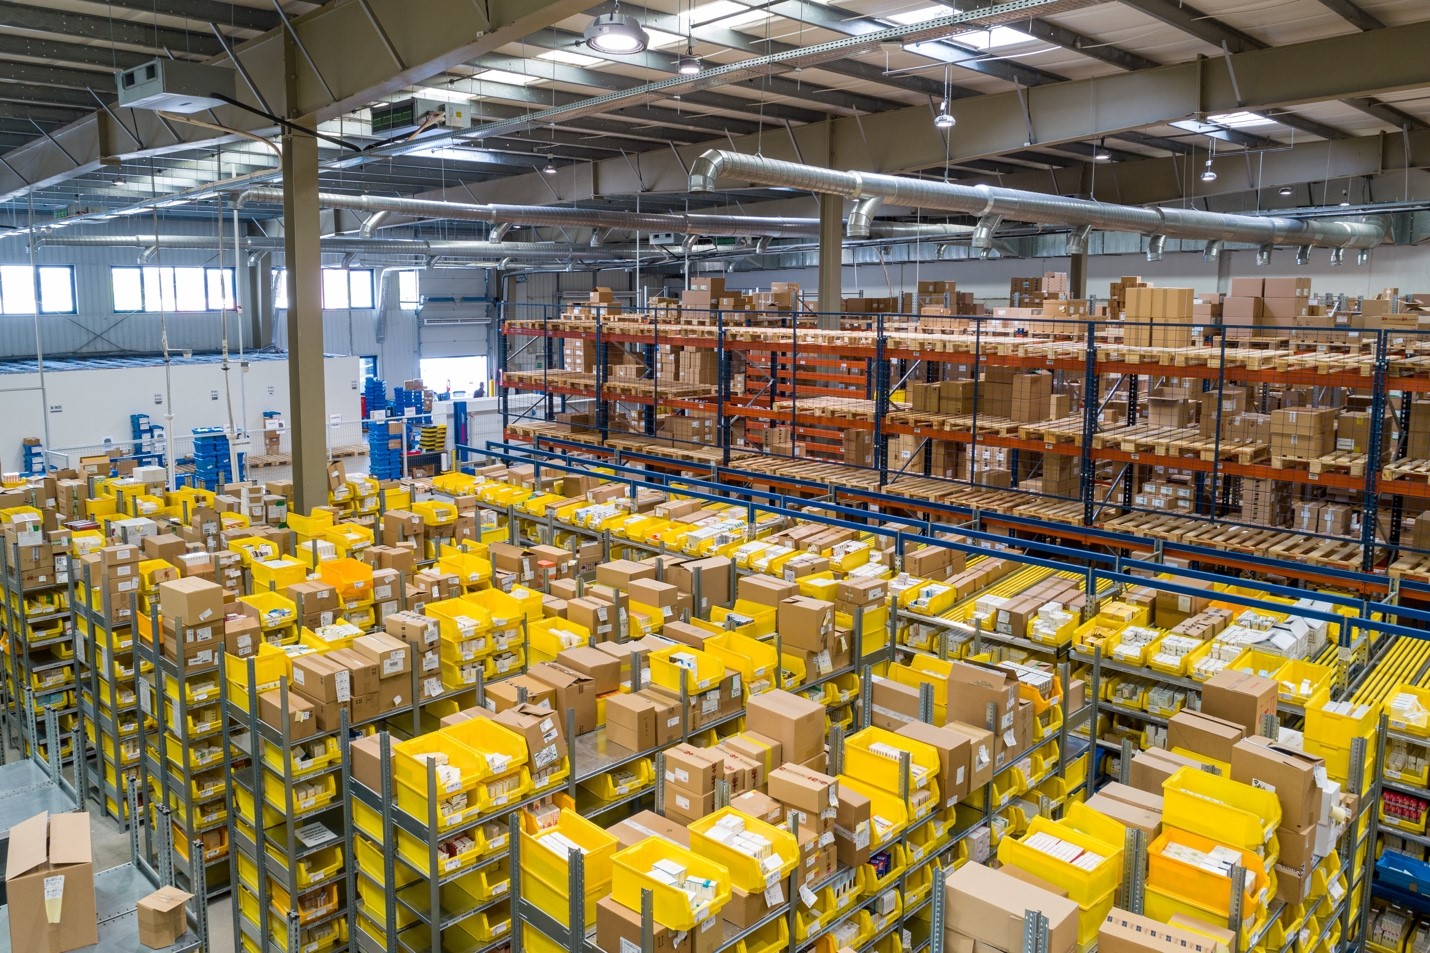 Using Vision AI to resolve critical challenges in inventory management